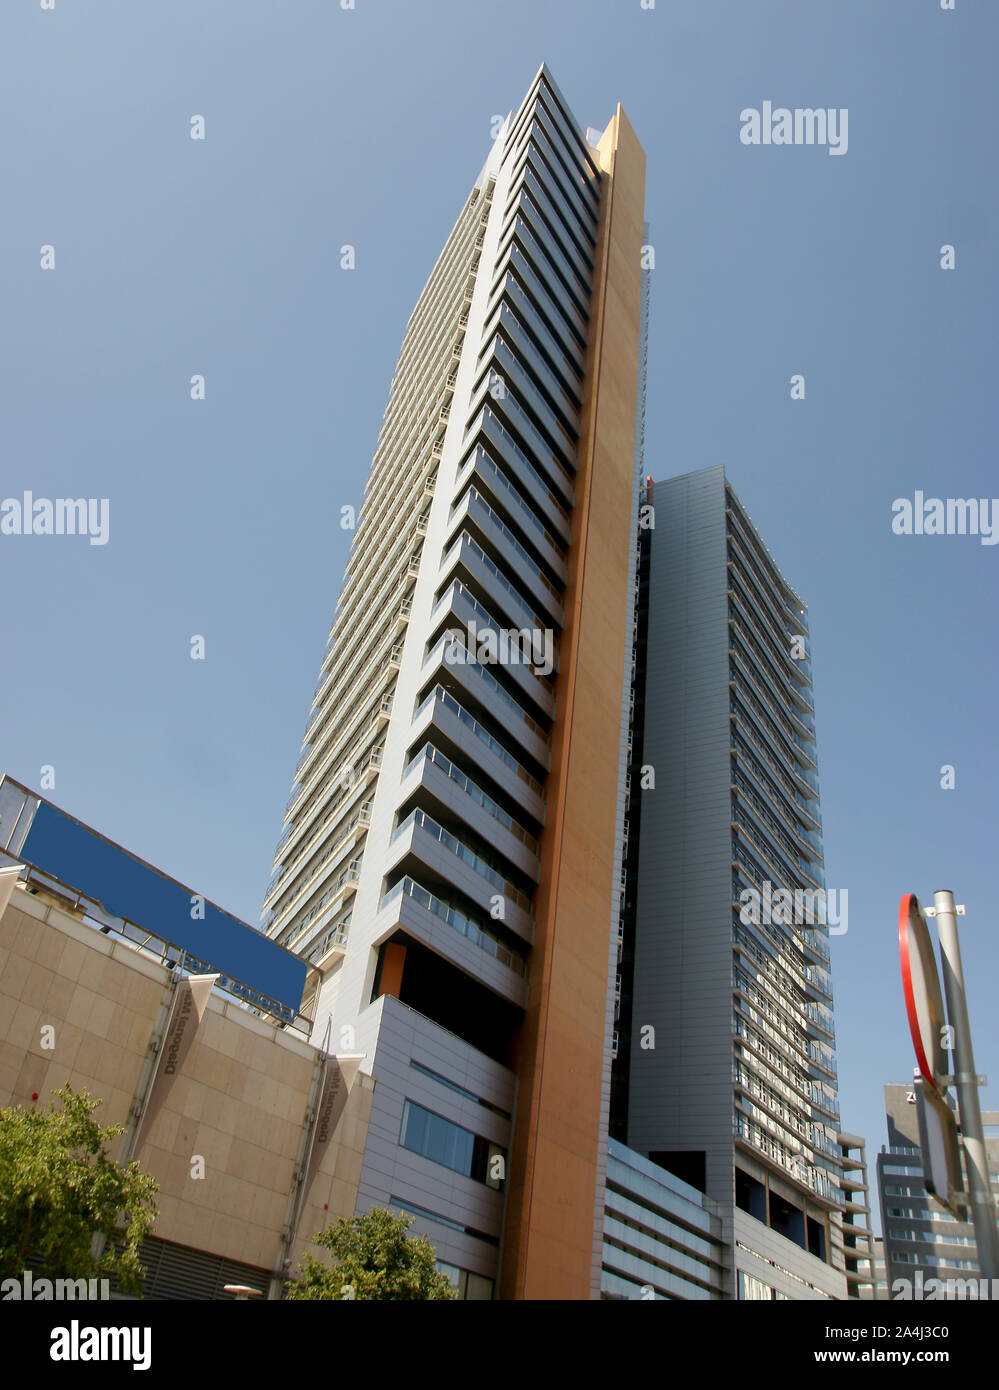 modern High rise apartment building Stock Photo